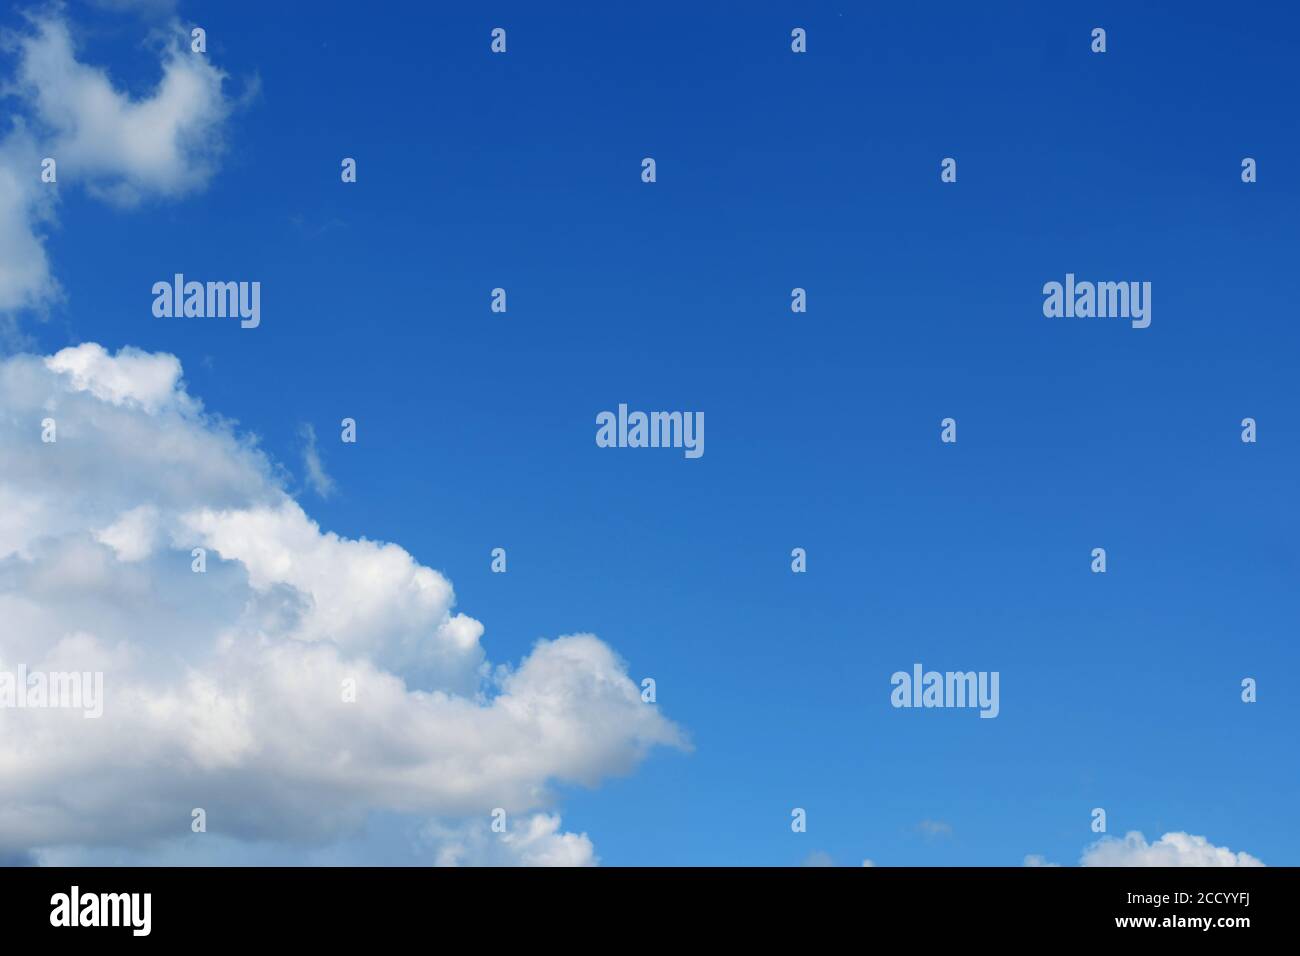 Pile of white clouds in the blue sky Stock Photo